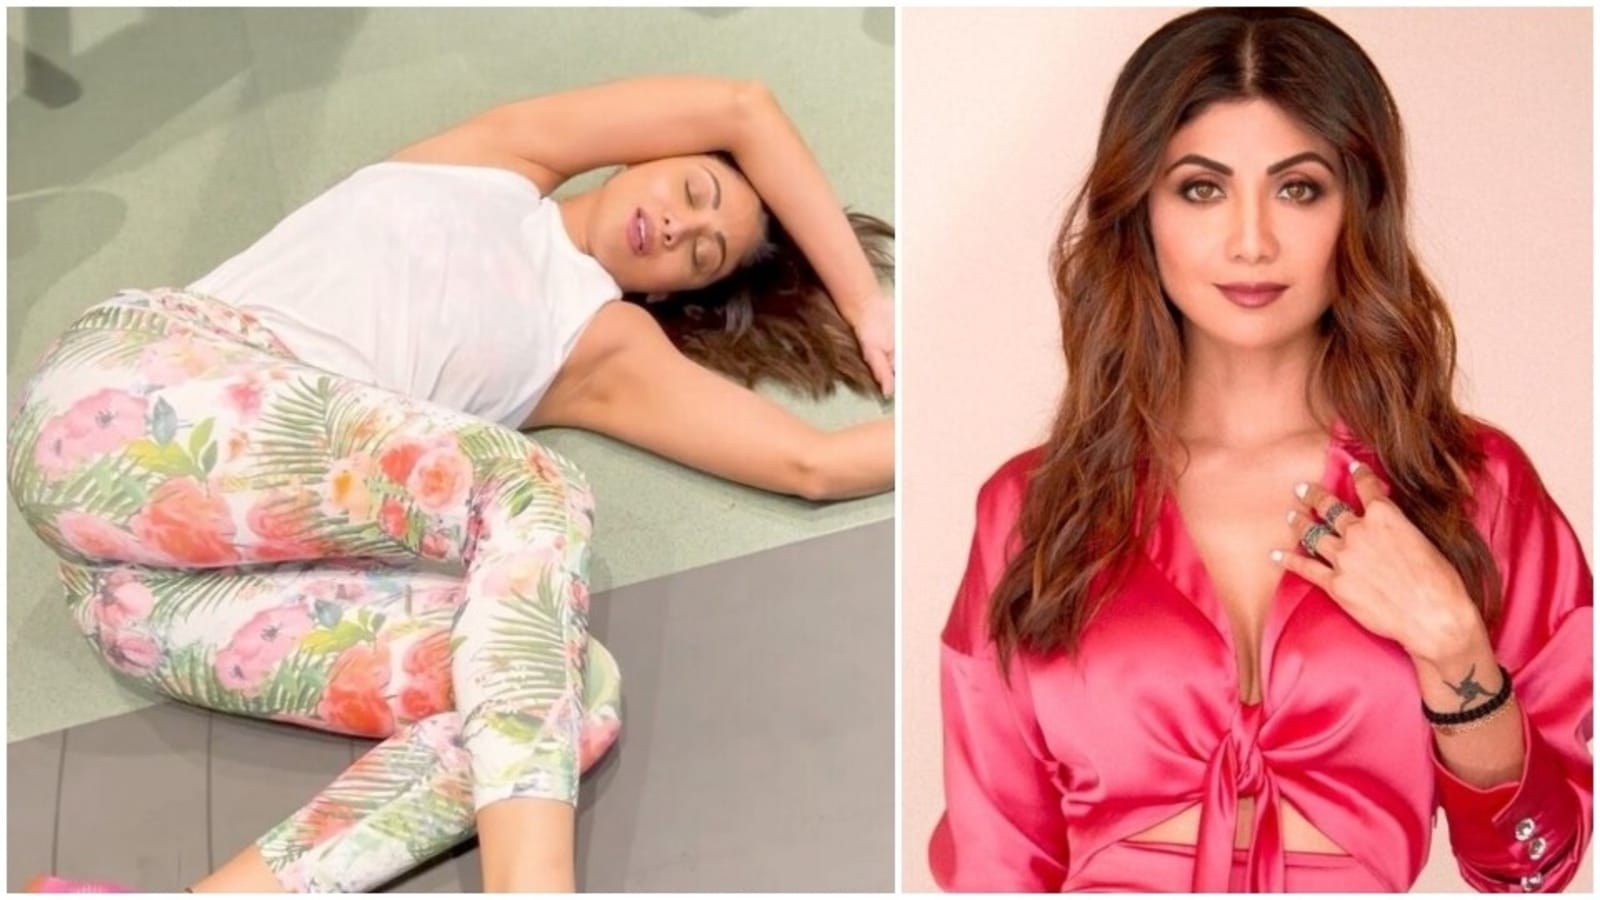 Bollywood Shilpa Shetty Xxx Video - Shilpa Shetty passes out after tough workout in funny post-gym video: Watch  | Health - Hindustan Times